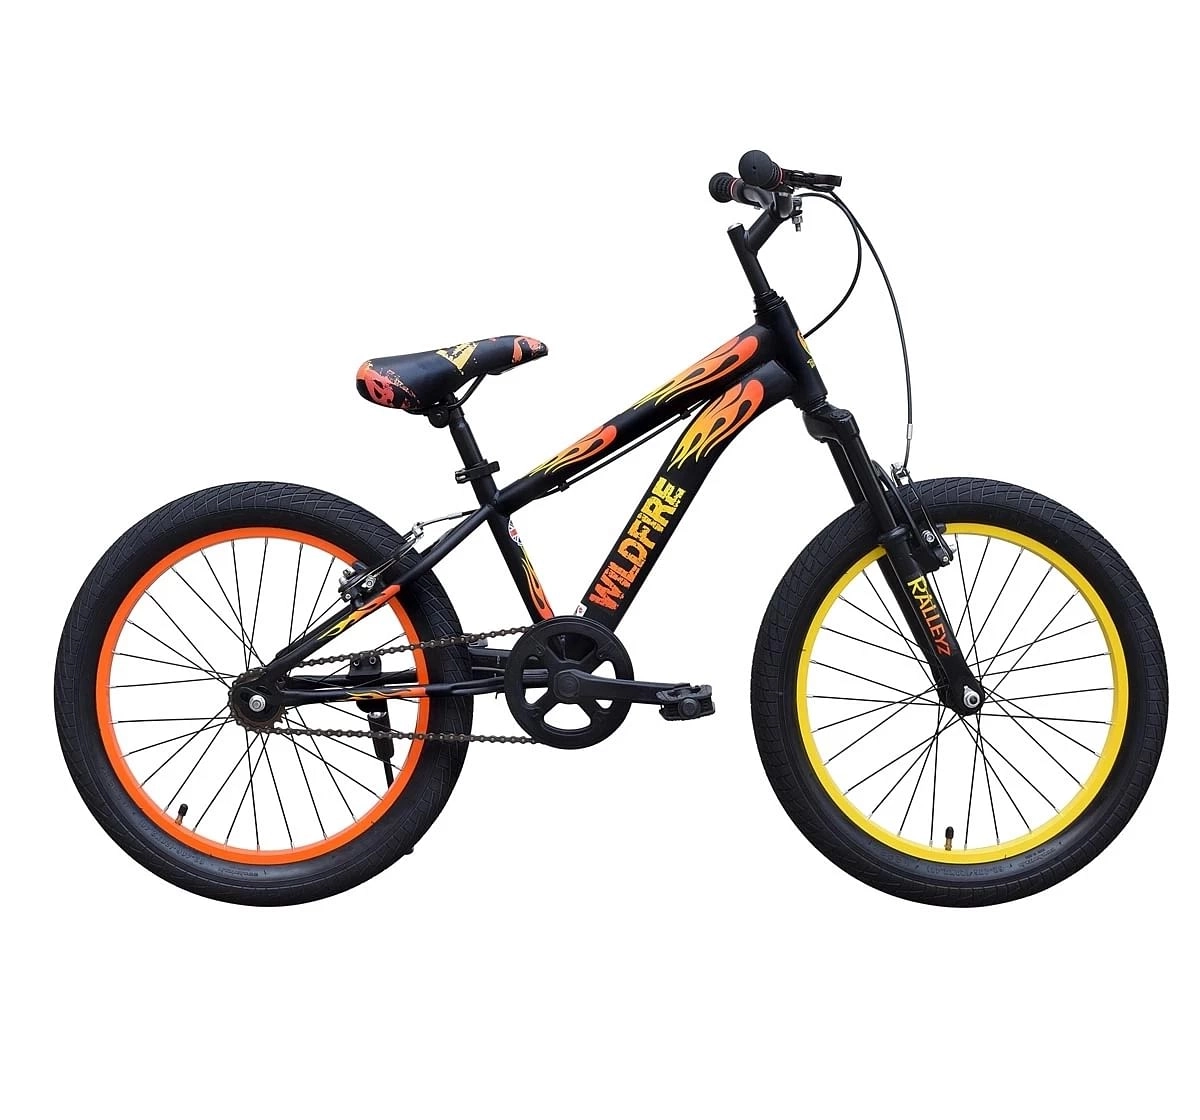 Ralleyz Astra Squandron Wildfire 20 Inch, Bicycles For Kids, Multicolour, 7Y+